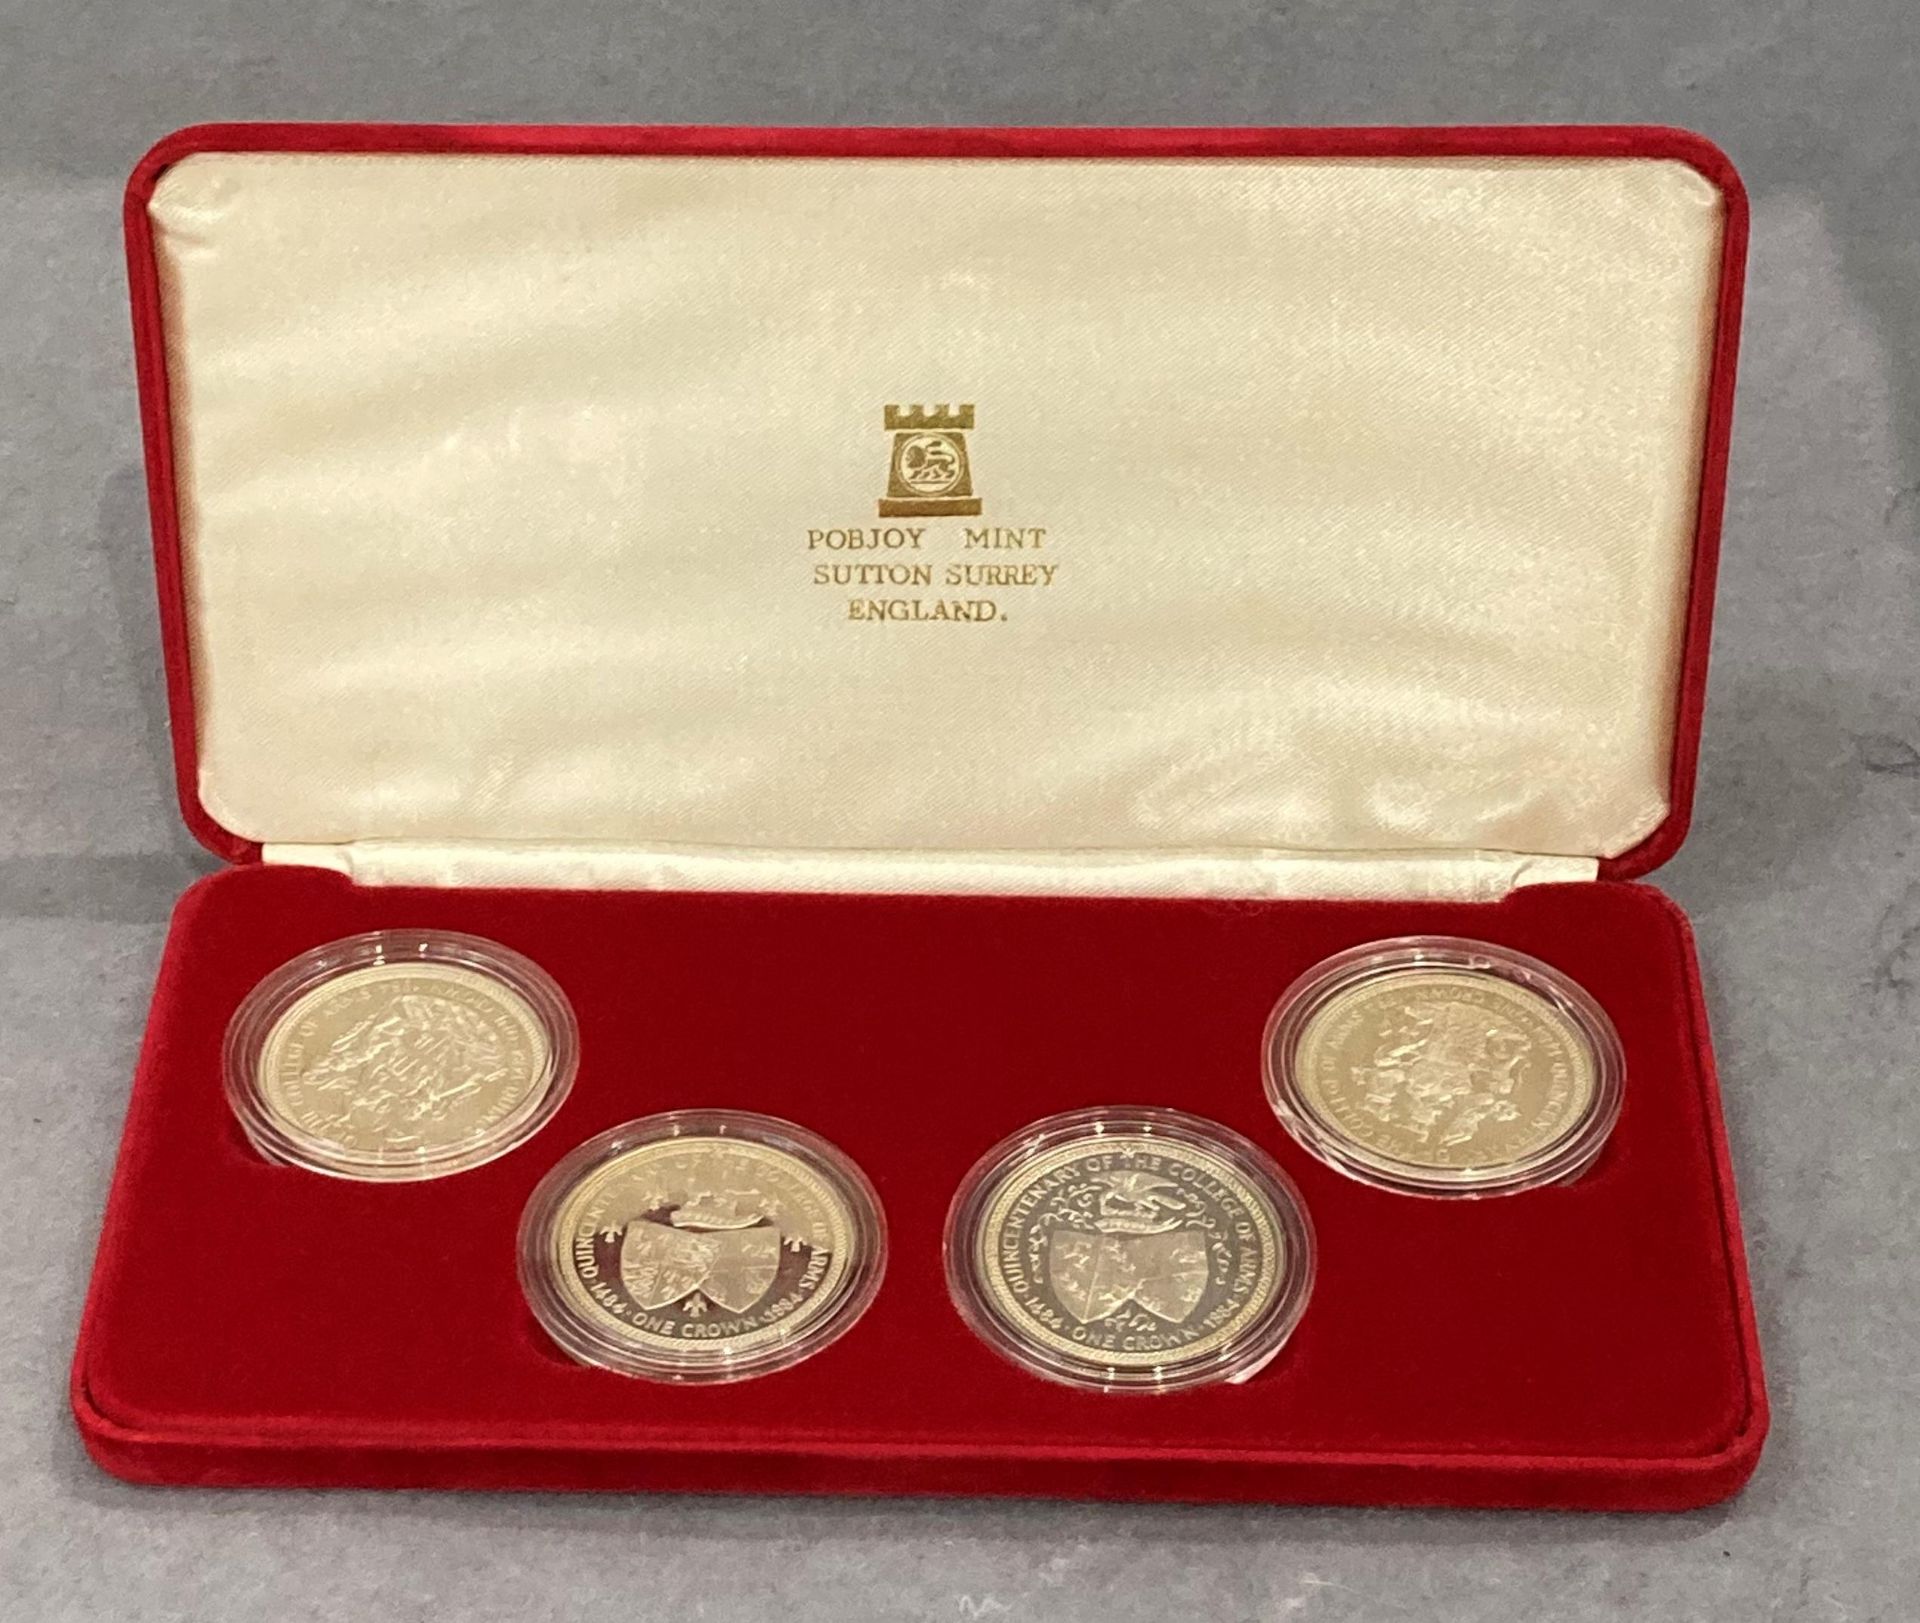 Quincentenary of the Colleage of Arms - 4 coin set